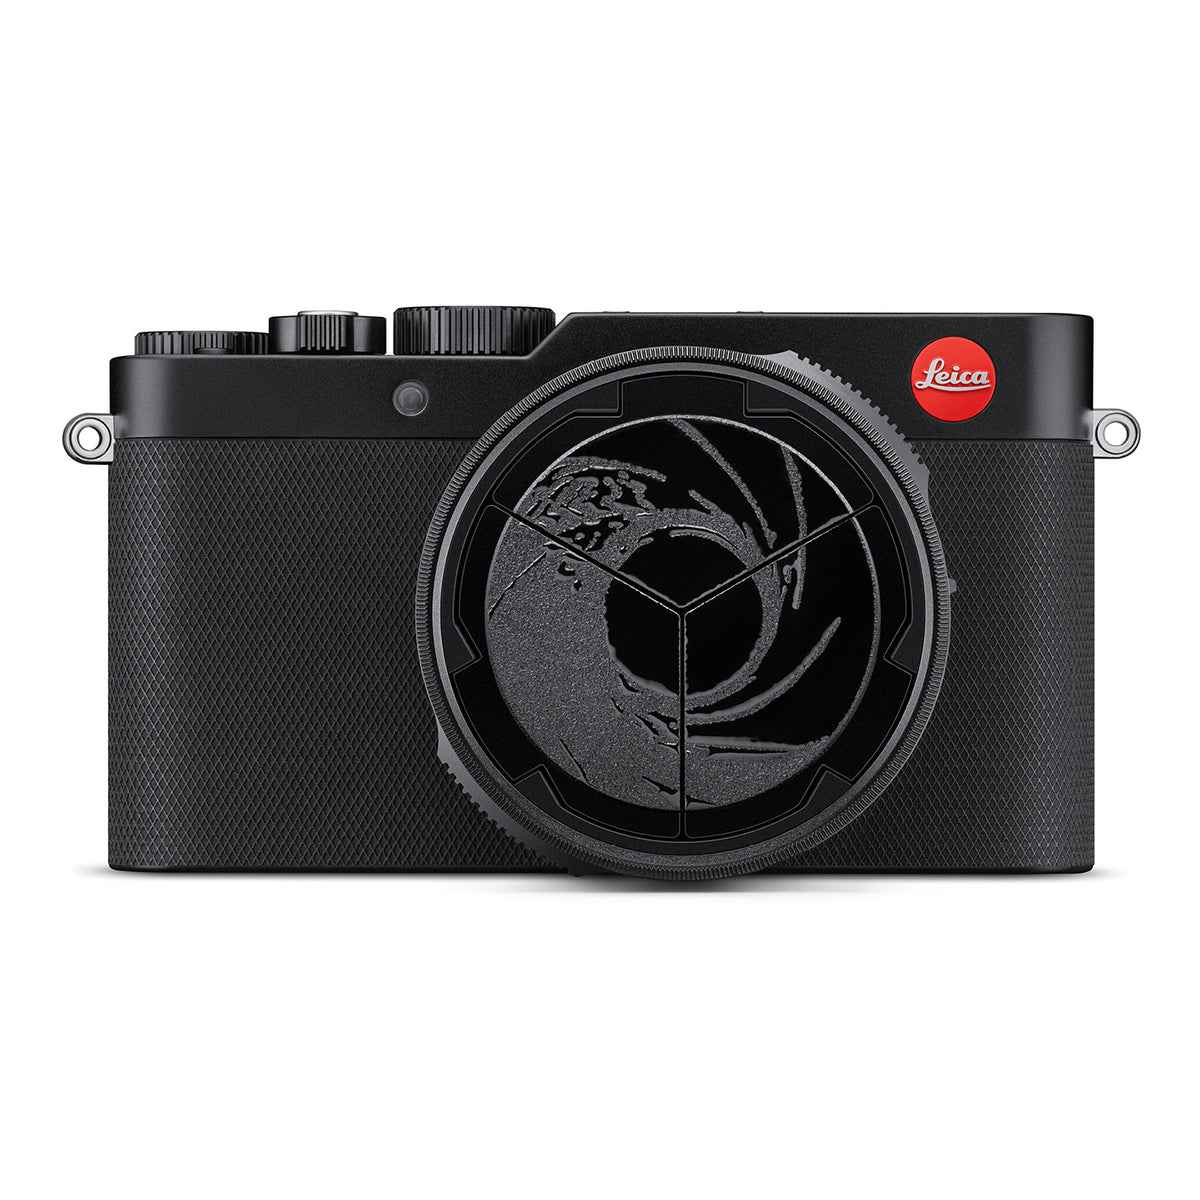 James Bond Leica D-Lux 7 007 Camera - Numbered Edition (Pre-order)